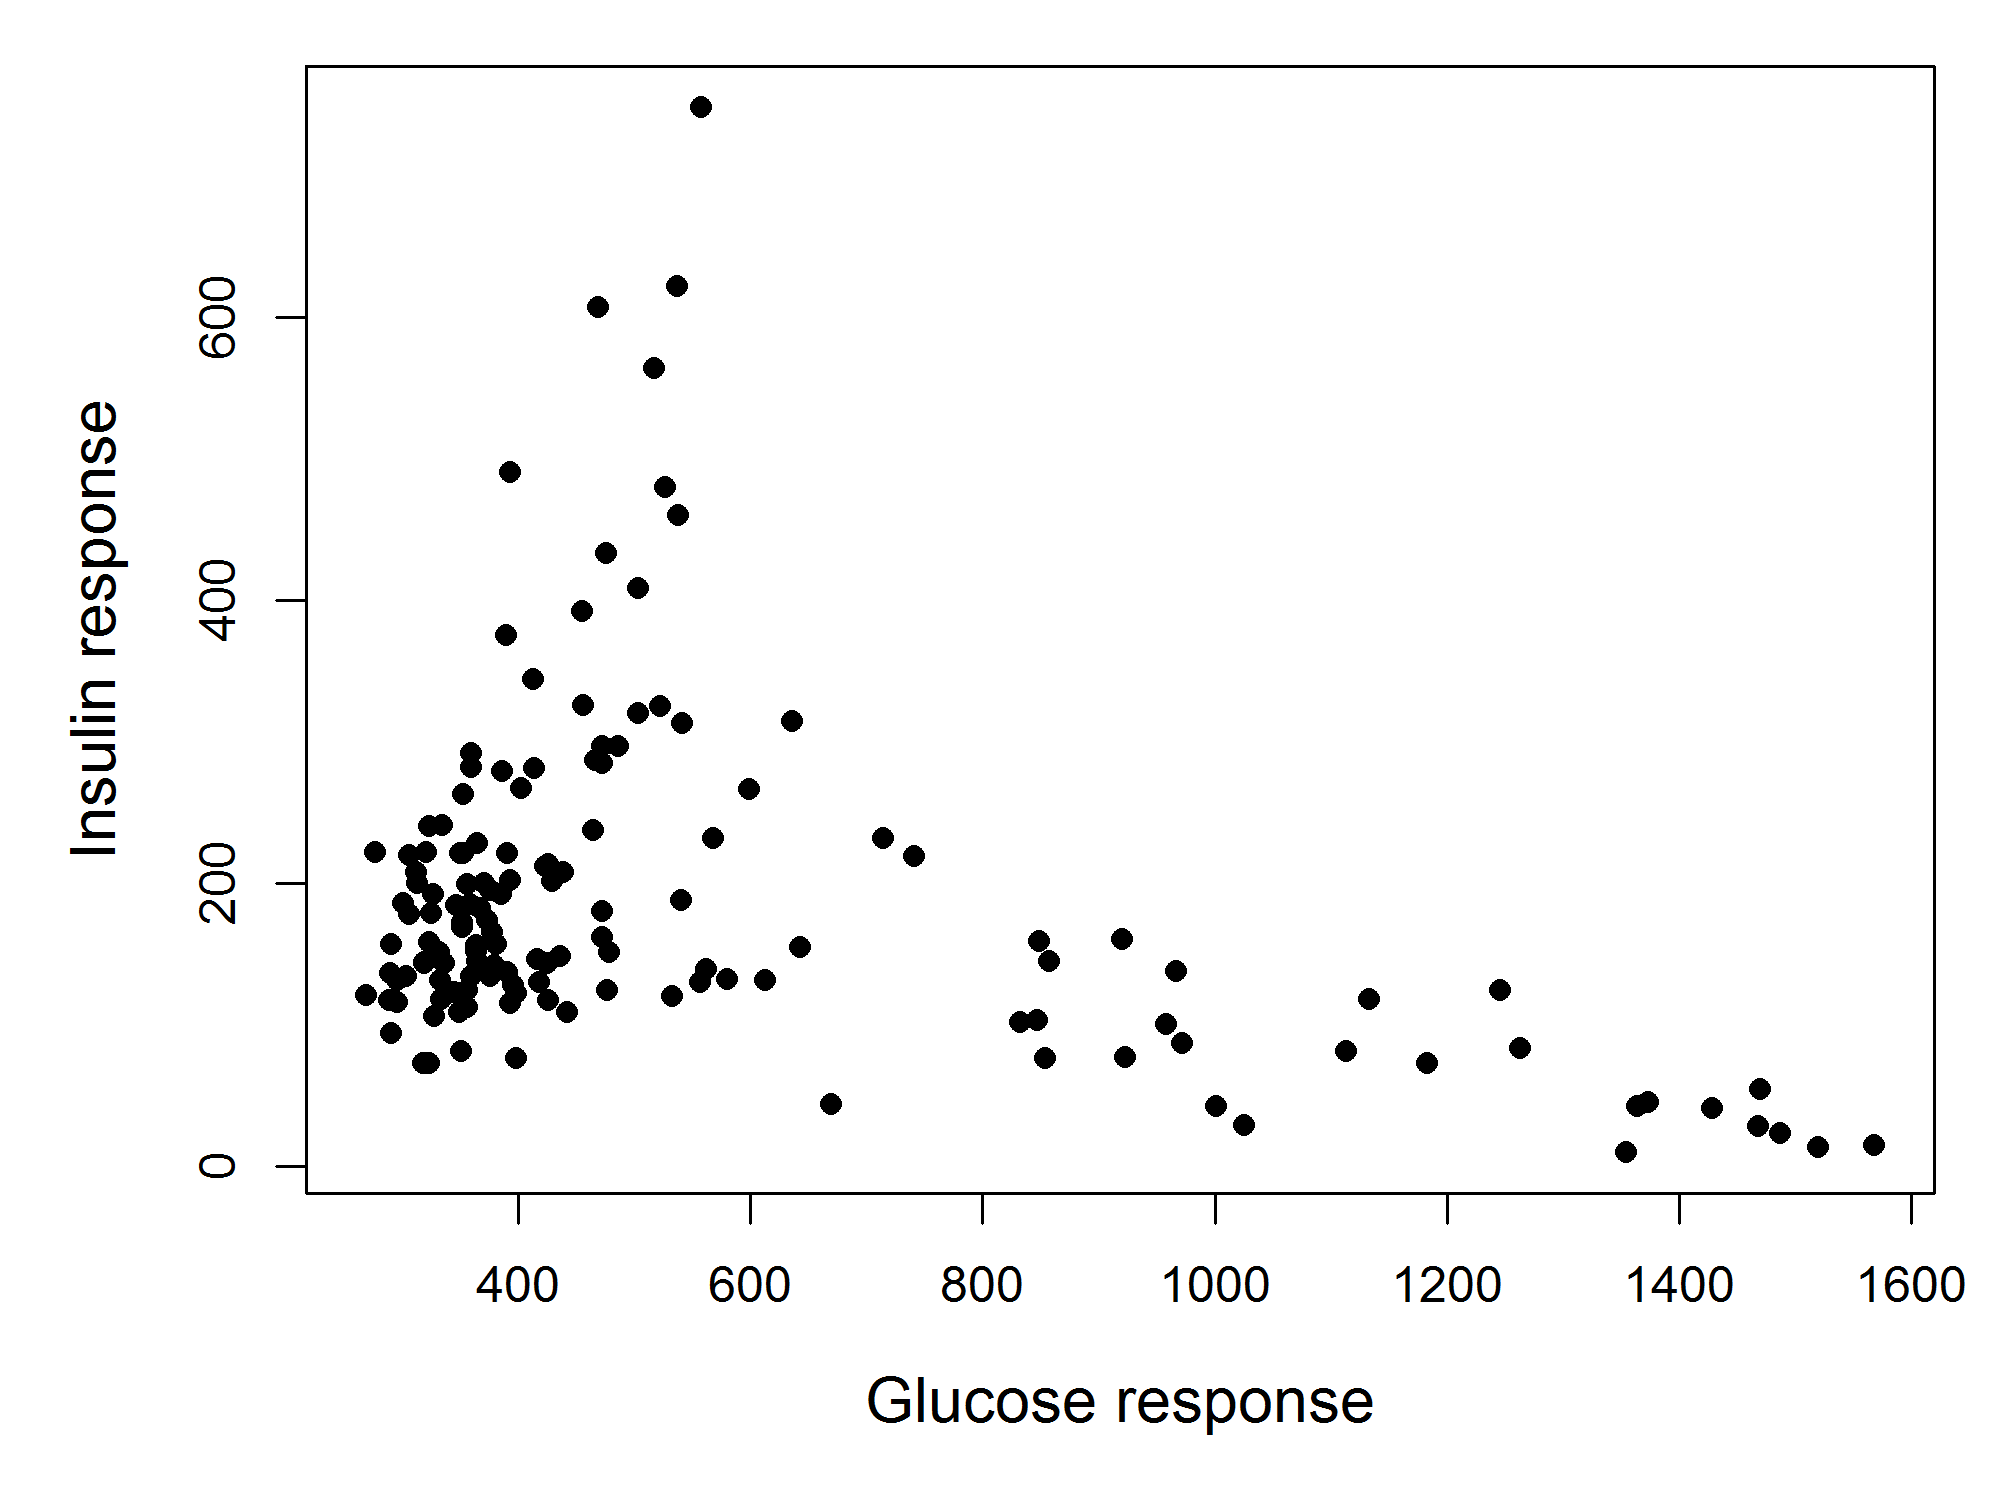 Diabetes data: Reproduction of a graph similar to that from Reaven and Miller (1968) on the relationship between glucose and insulin response to being given an oral dose of glucose.